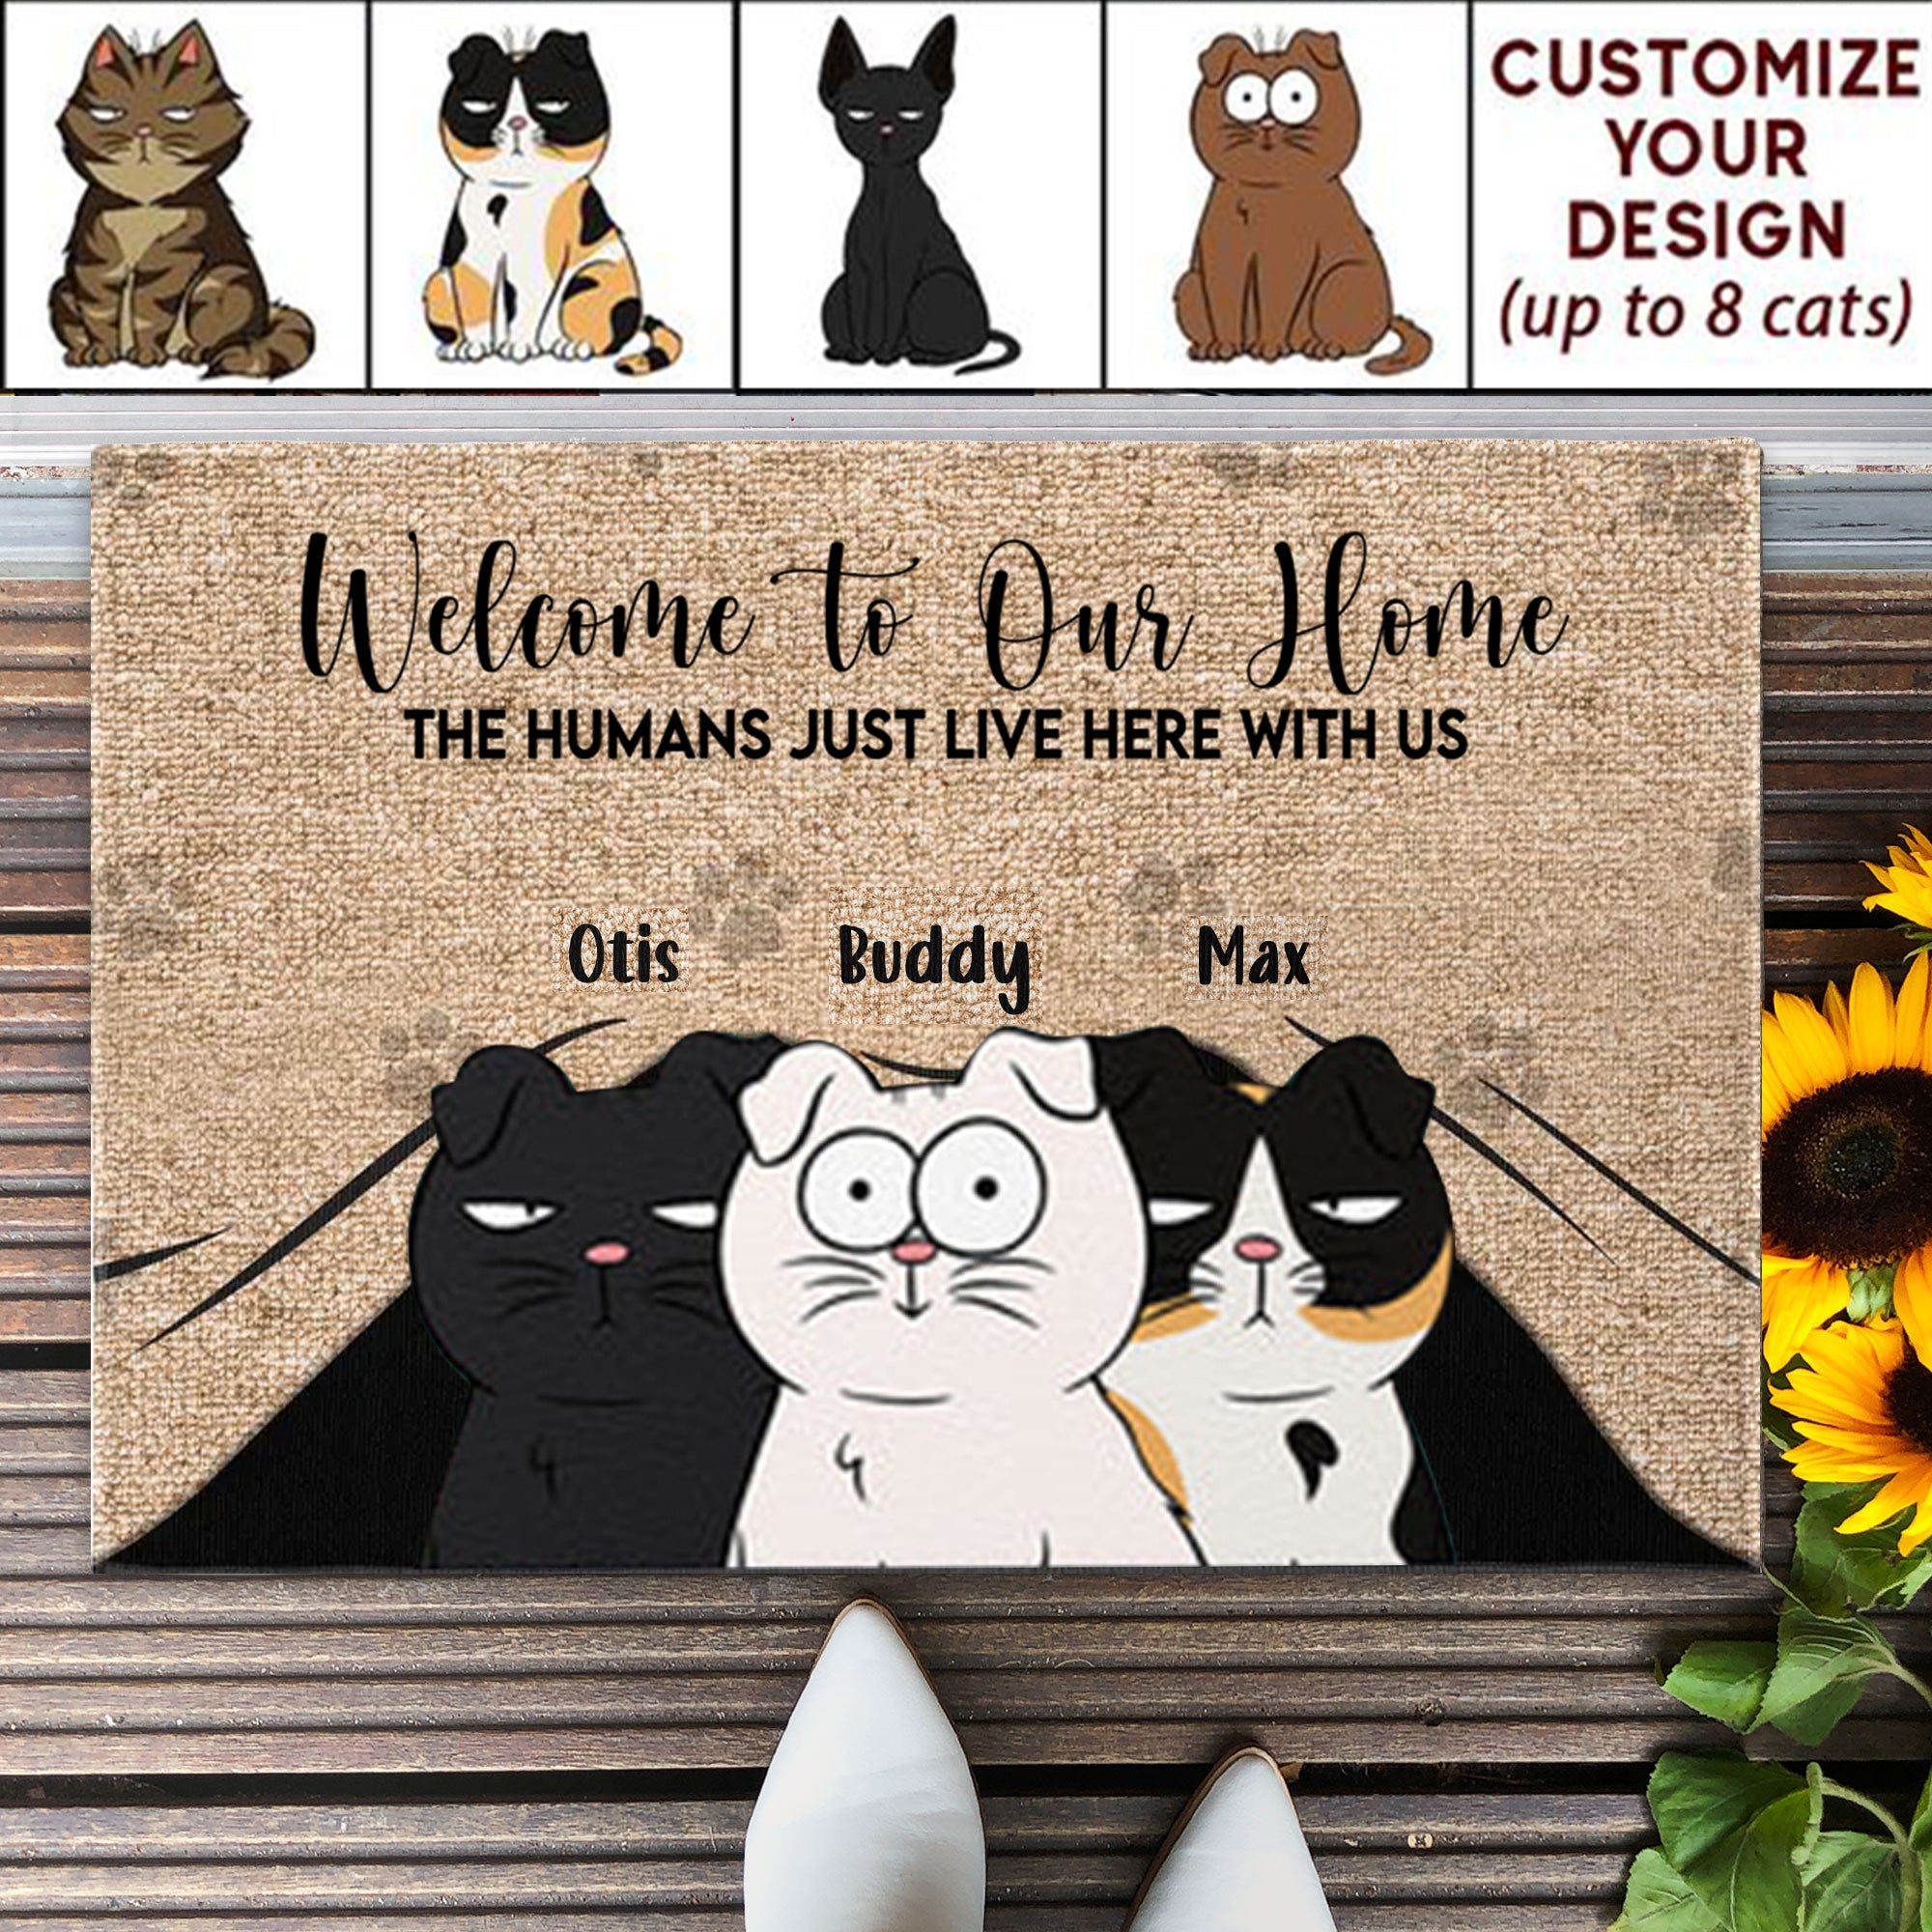 The Humans Just Live Here With Us - Personalized Doormat